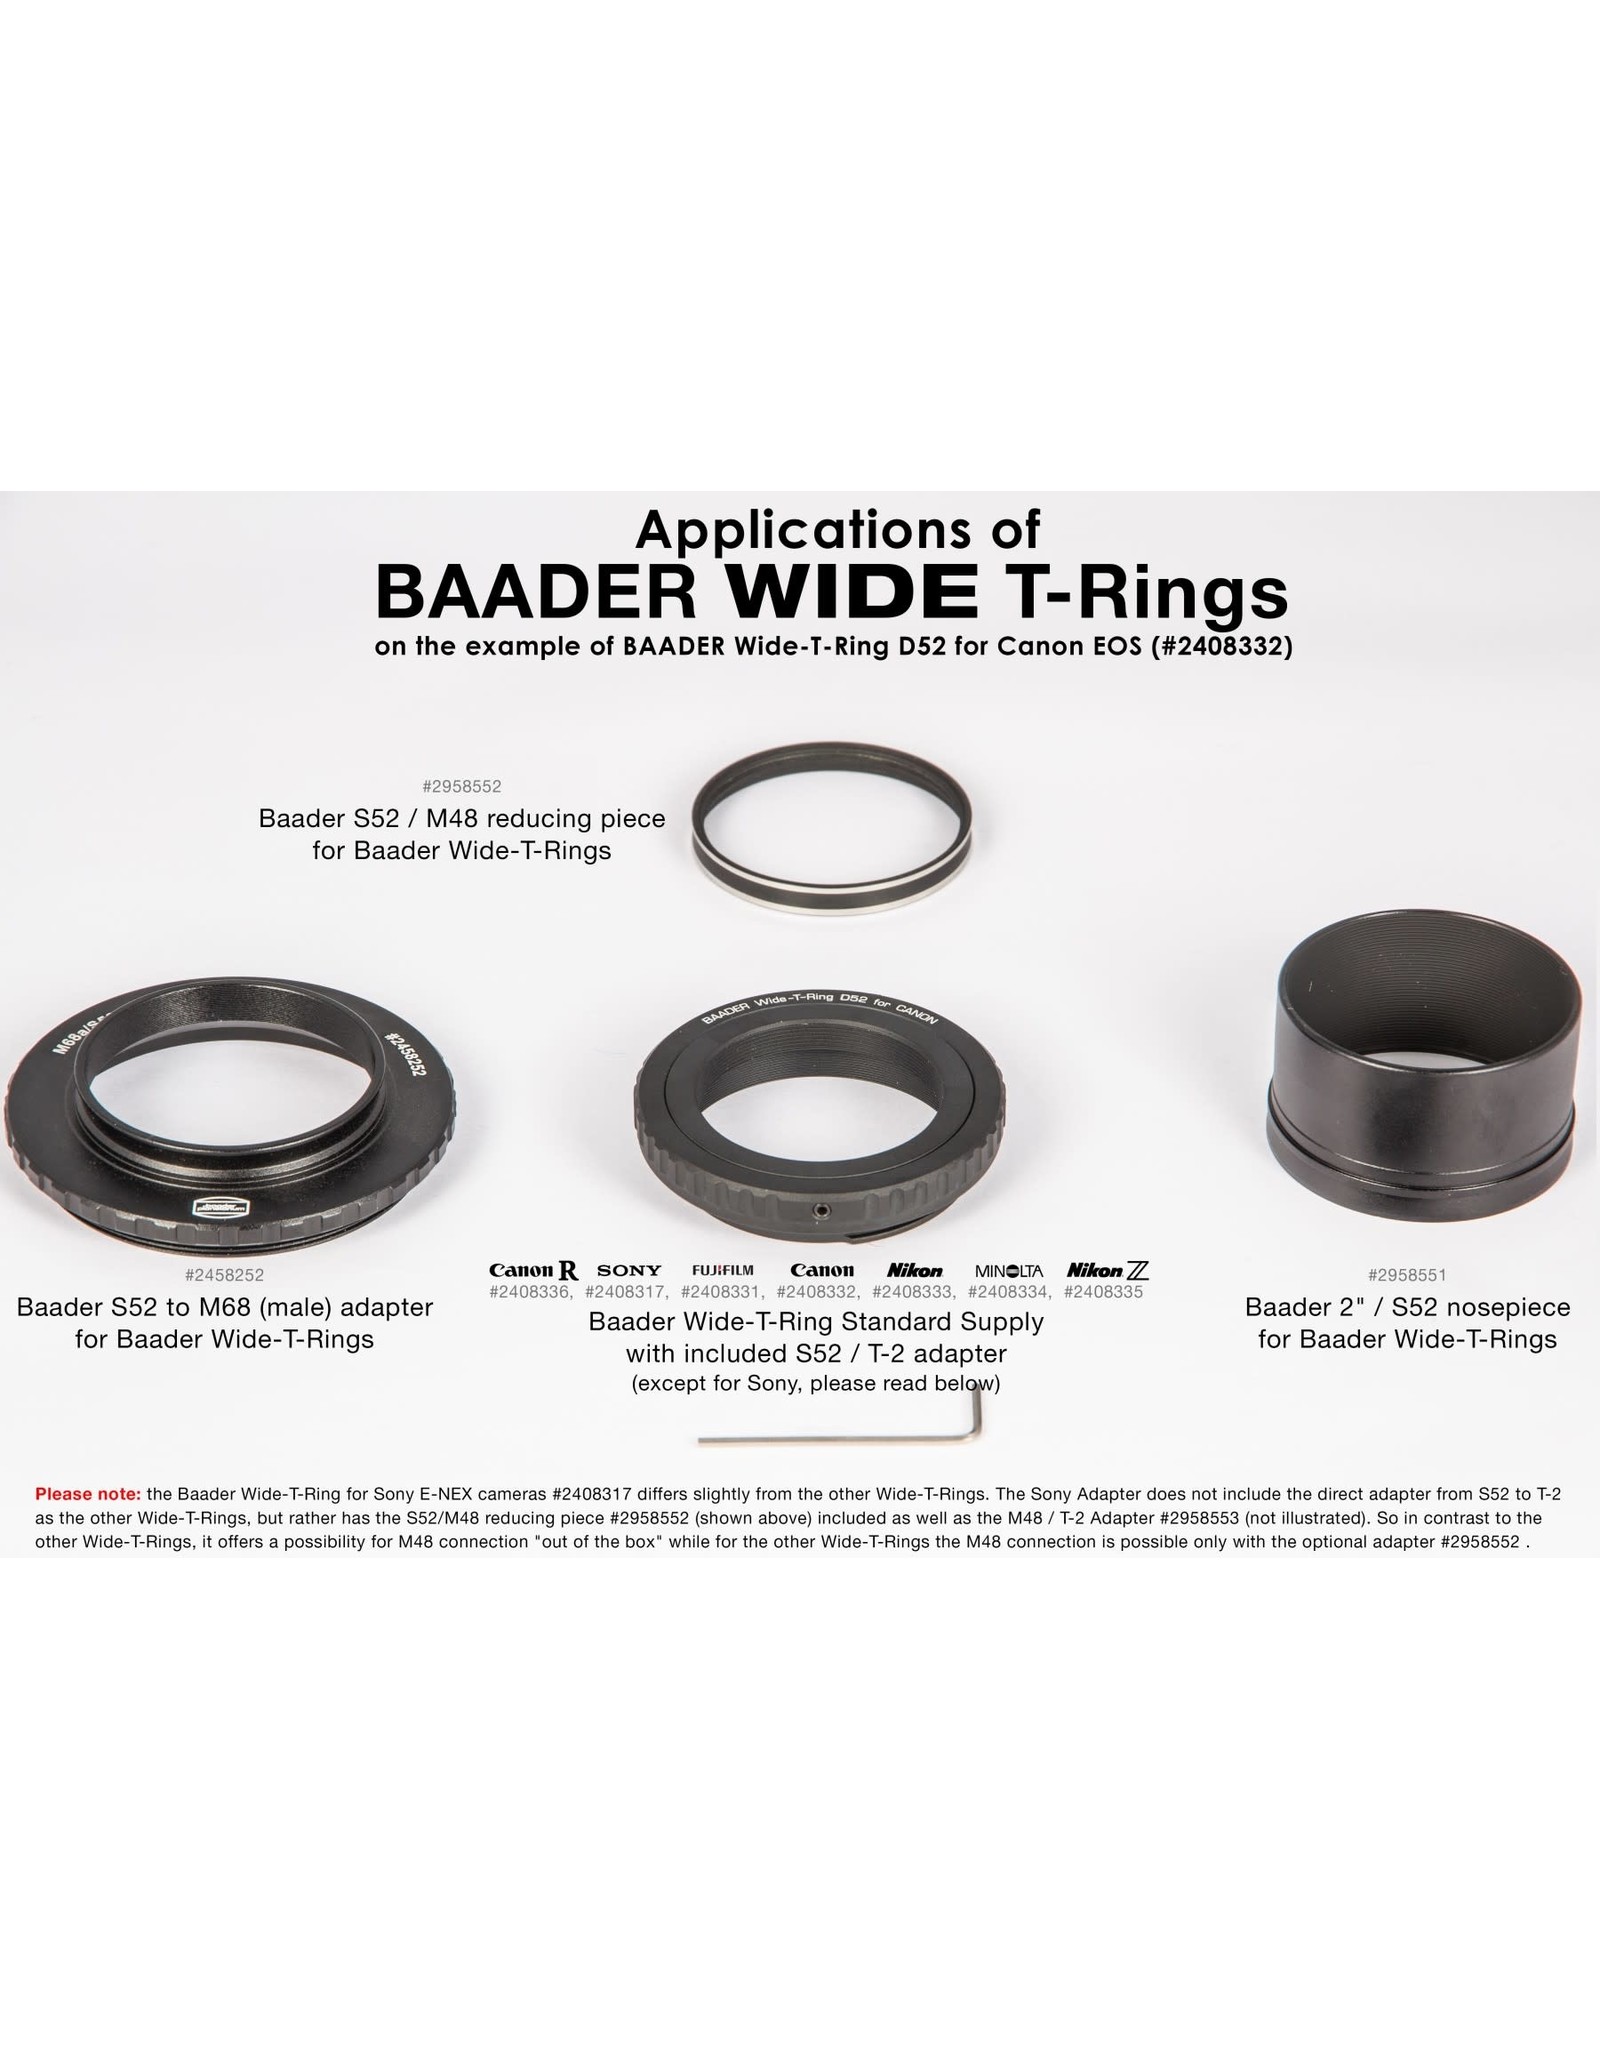 Baader Planetarium Baader Wide-T-Ring Nikon Z (for Nikon Z bajonet) with D52i to T-2 and S52